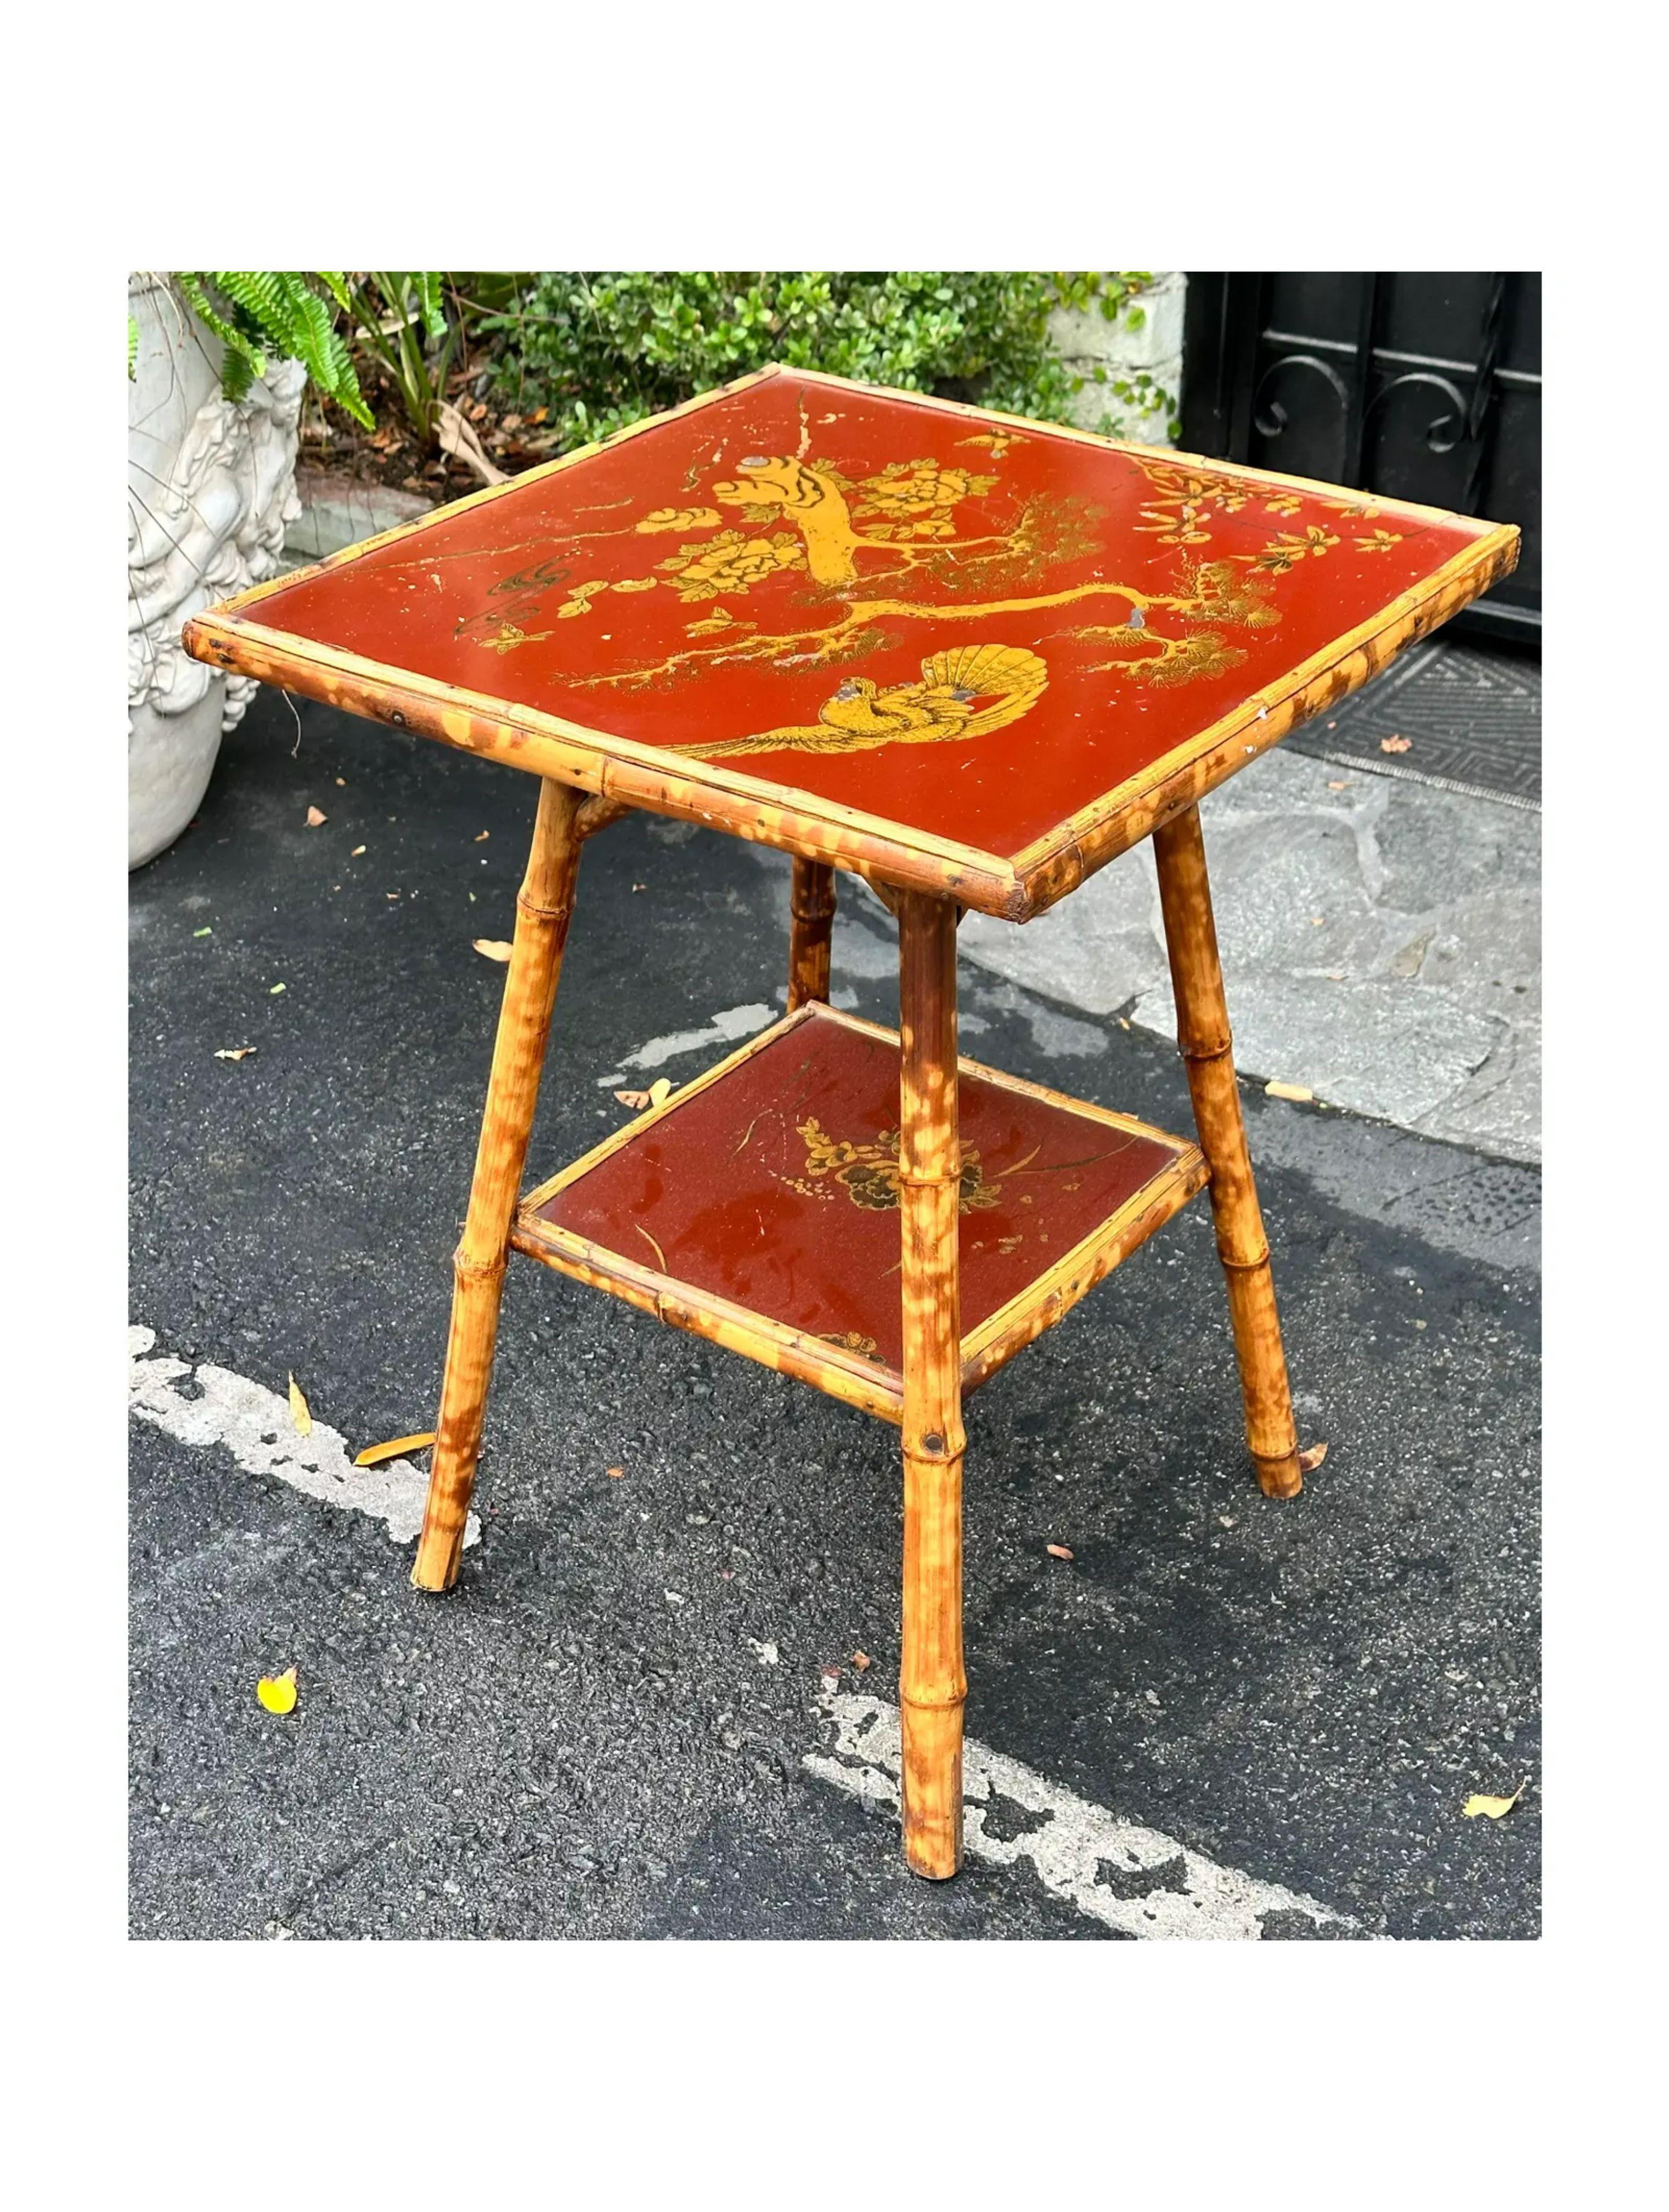 Antique Regency Style Red chinoiserie bamboo table. It features beautifully hand painted decoration on a cinnabar red ground.

Additional information: 
Materials: Bamboo
Color: Red
Period: 19th century
Styles: chinoiserie, Regency
Table